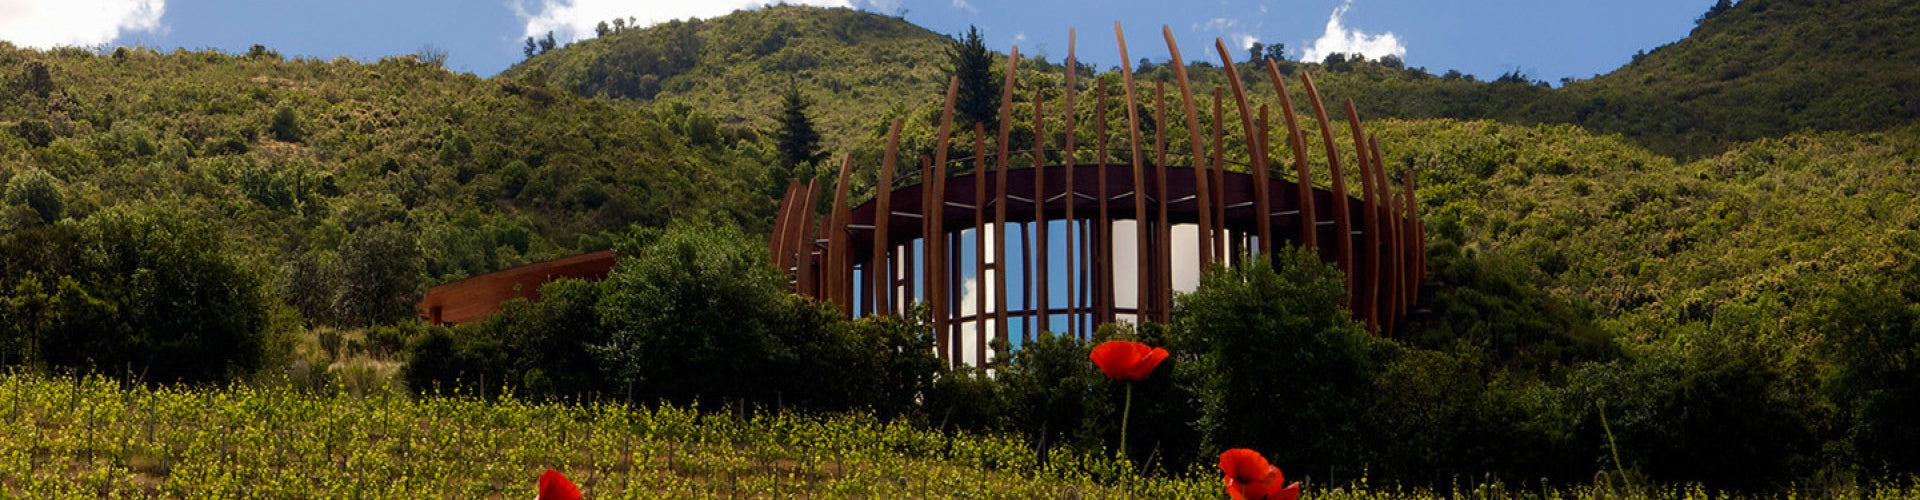 The Clos Apalta Winery in Chiles Colchagua Valley